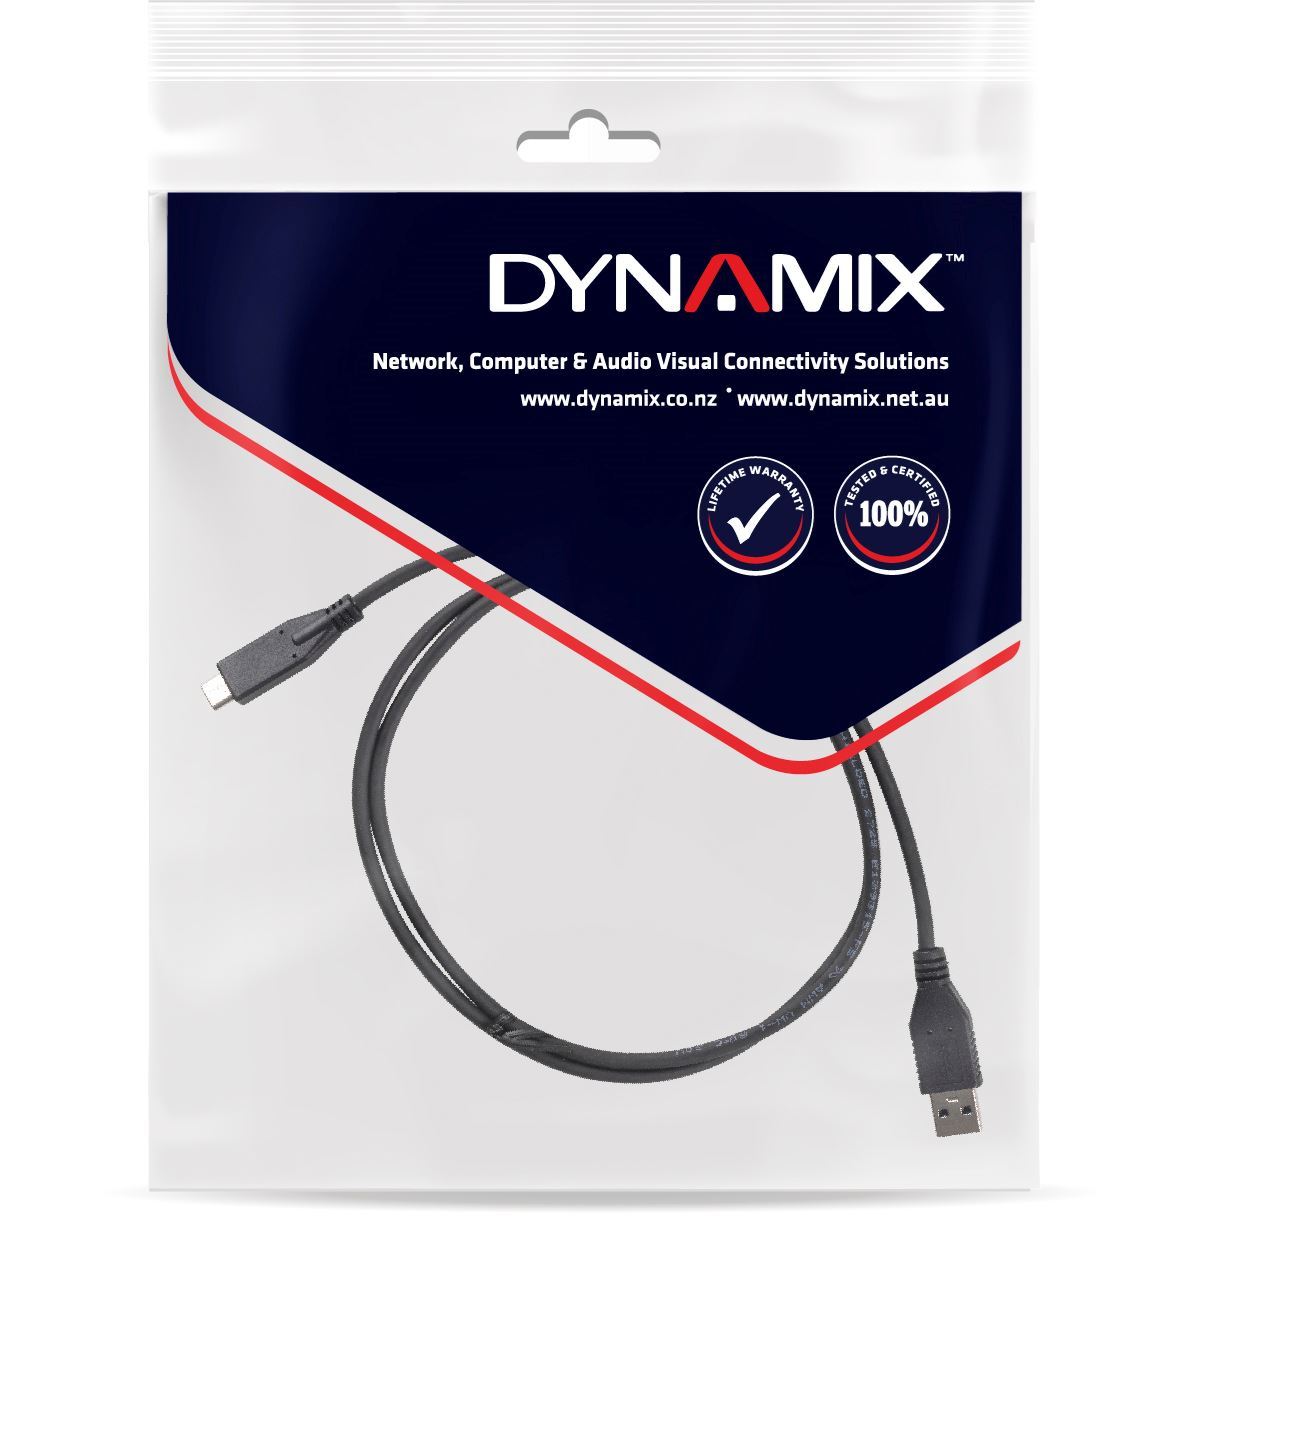 DYNAMIX_3M,_USB_3.1_USB-C_Male_to_USB-A_Male_Cable._Black_Colour._Up_to_10G_Data_Transfer_Speed,_Supports_3A_Current. 1145